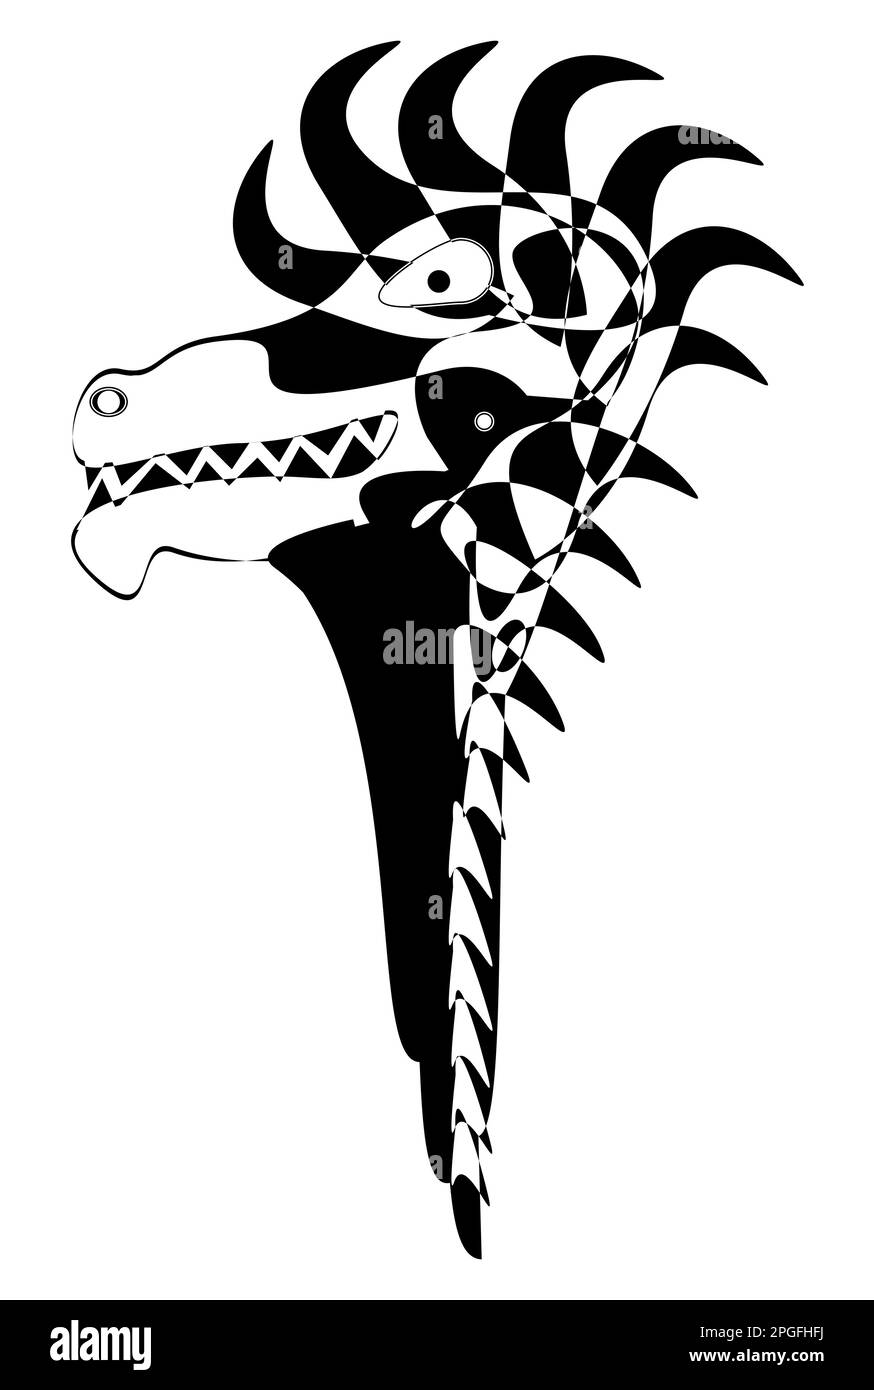 Dragon Head with Spikes in lineart. Wooden sculpture. Viking drakkar. Norway long boat. Vector illustration isolated on white background. Stock Vector